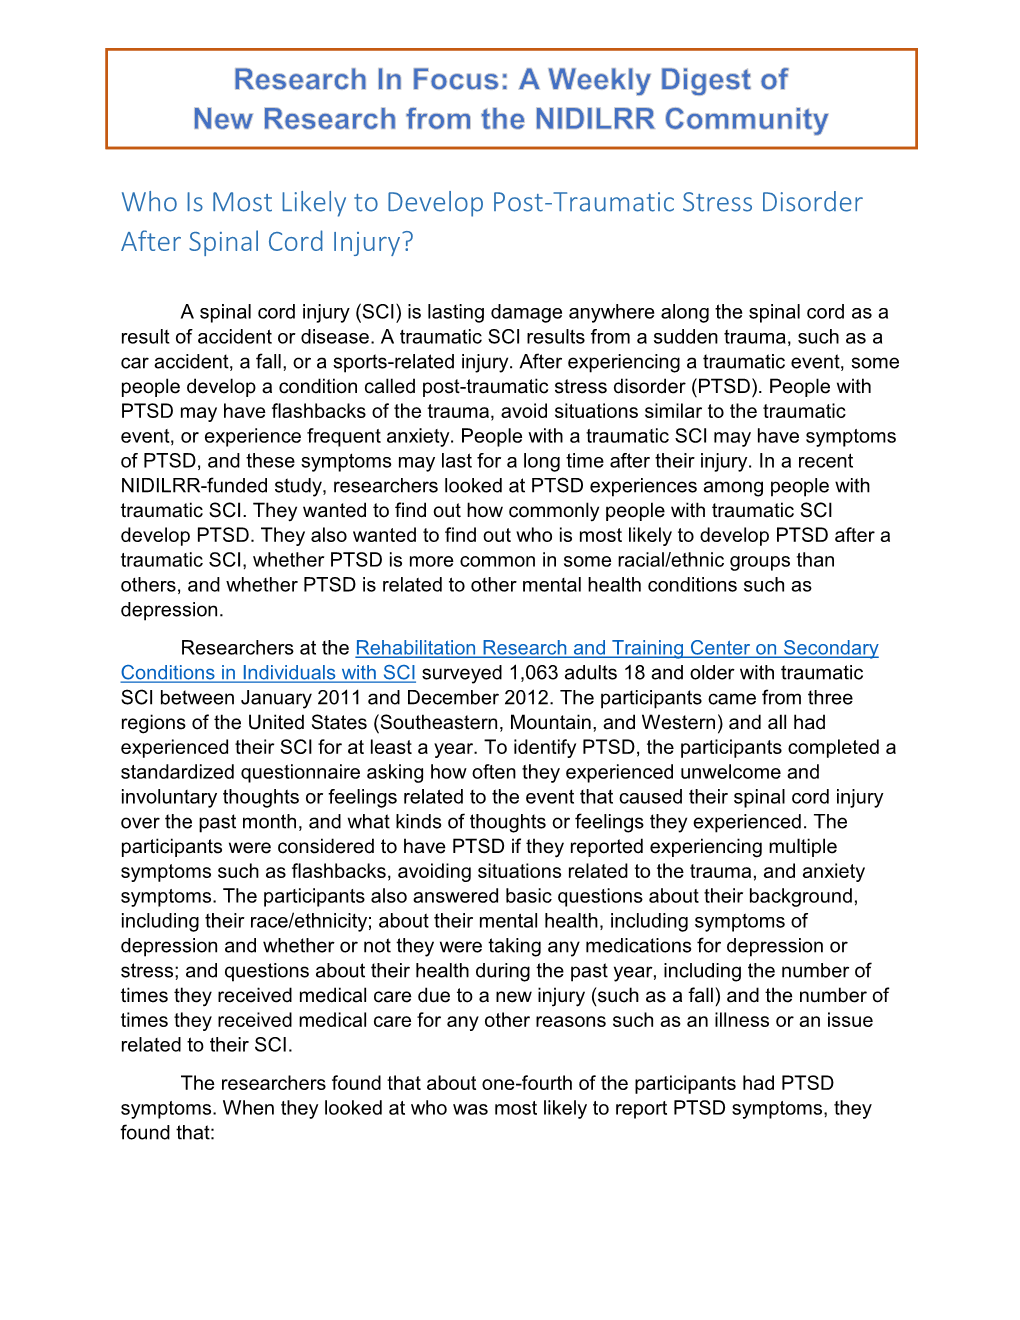 Who Is Most Likely to Develop Post-Traumatic Stress Disorder After Spinal Cord Injury?